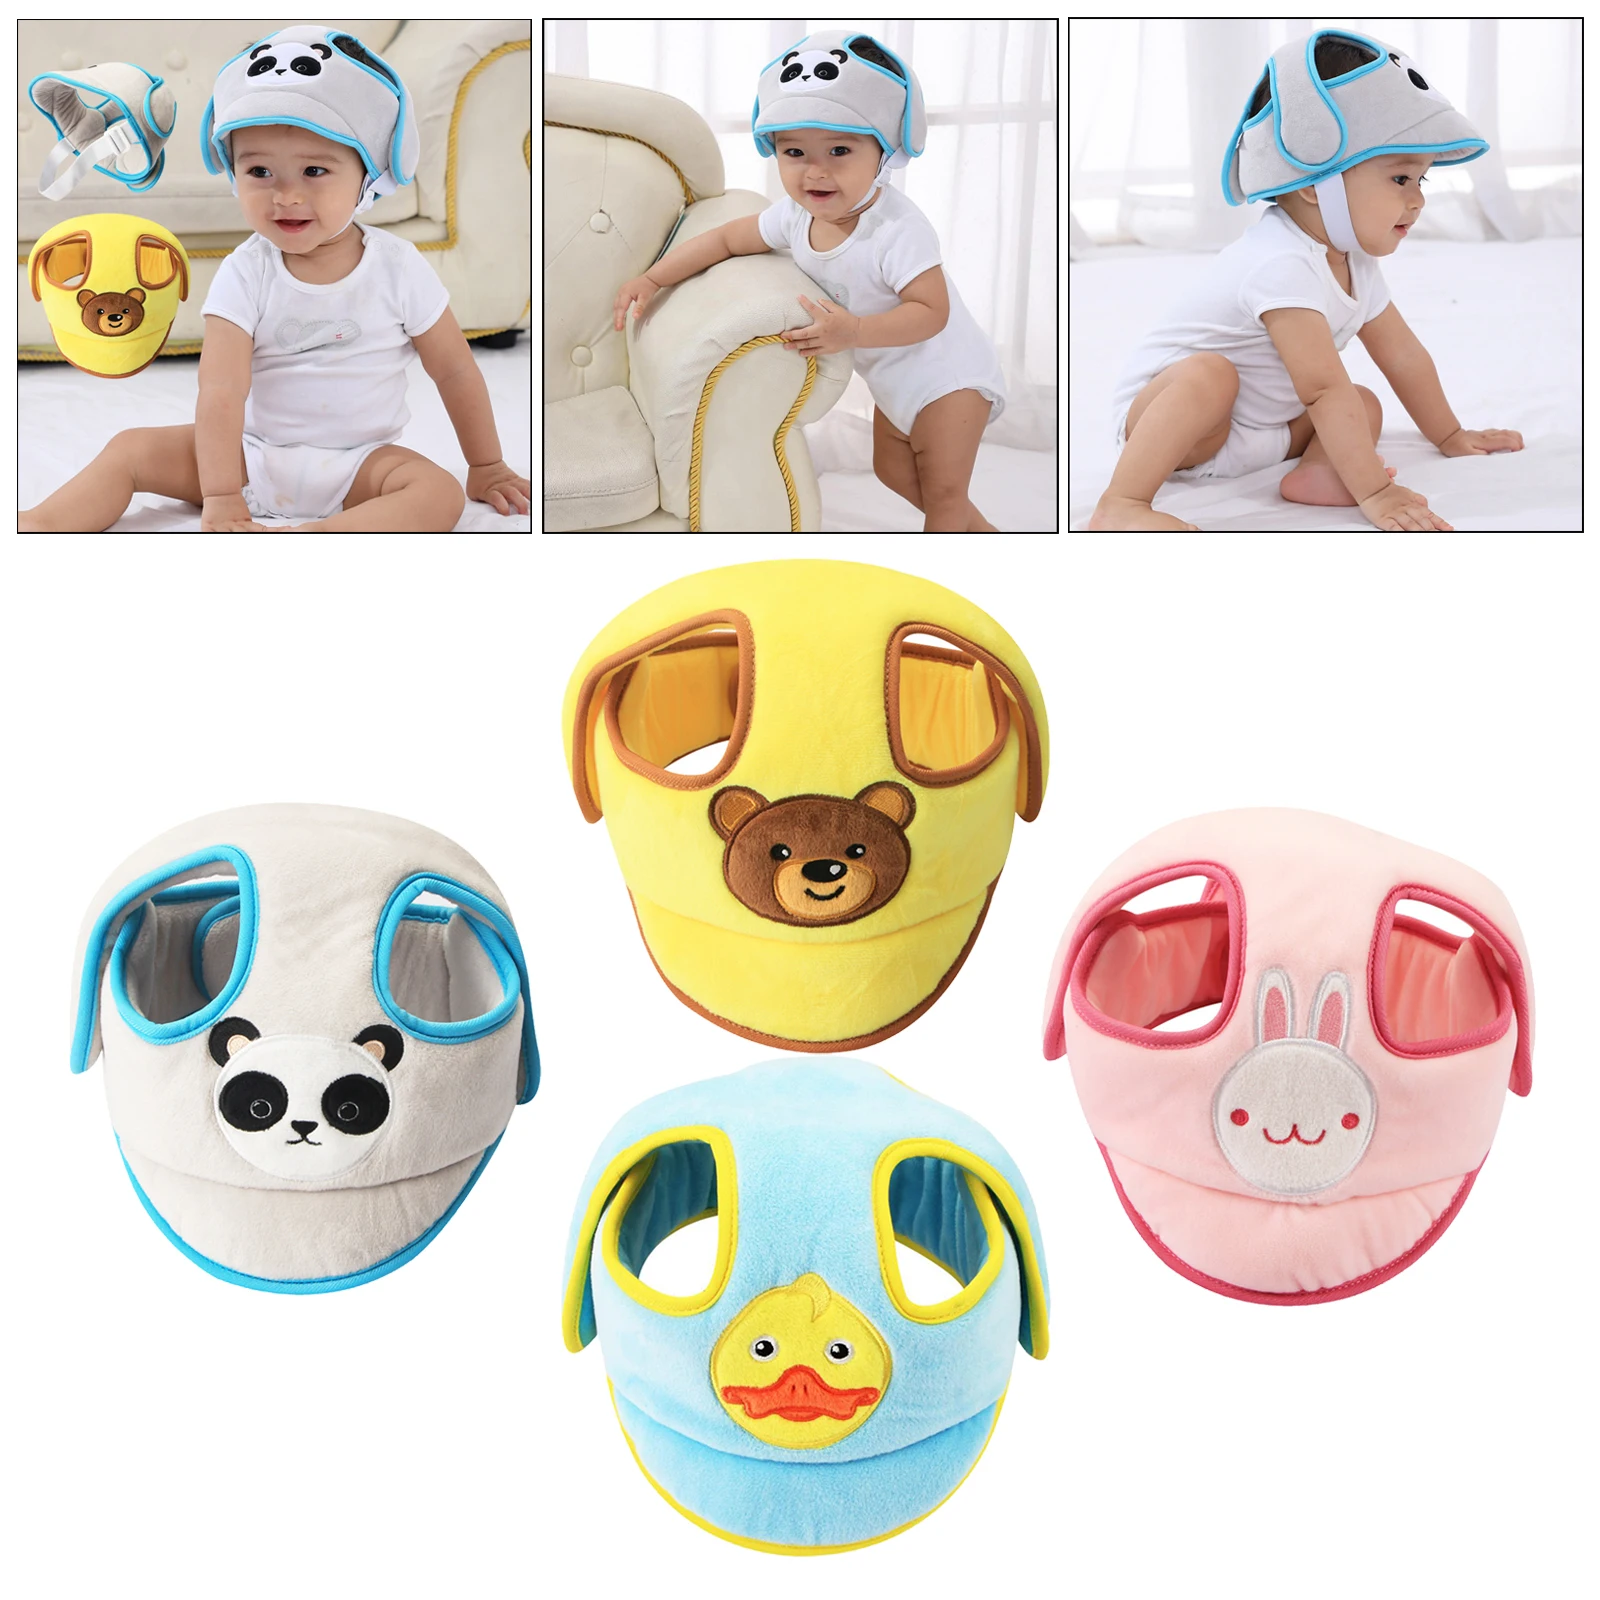 Adjustable Infant Toddler Kids Baby Head Guard  Safety Head Guard Cap